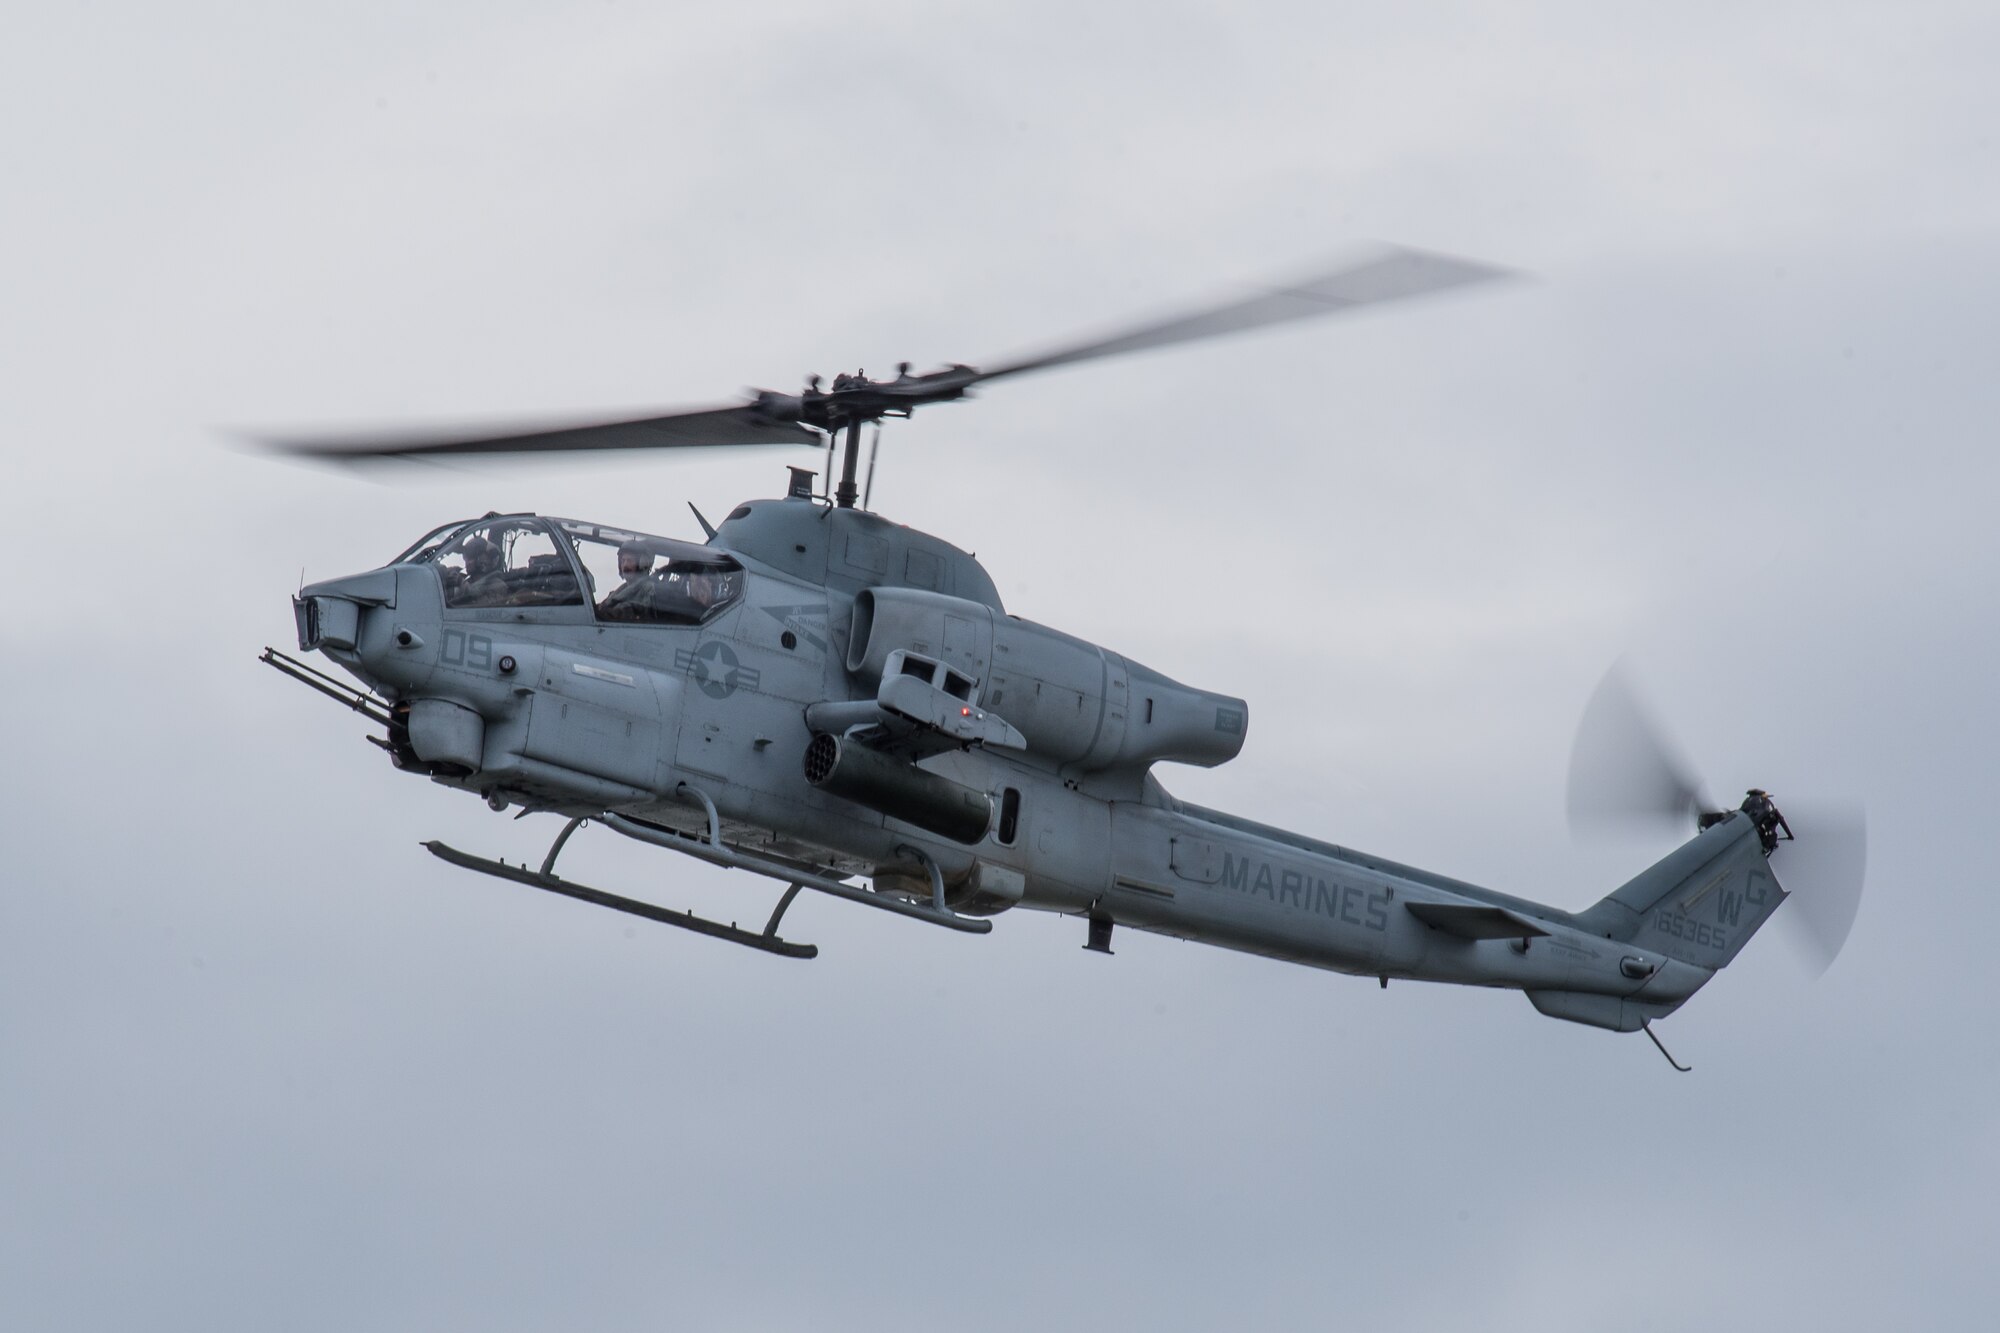 An AH-1W Super Cobra from the U.S. Marine Corps Light Attack Helicopter Squadron 773 at Joint Base McGuire-Dix-Lakehurst, N.J., performs an aerial demonstration during the Thunder Over Louisville airshow in Louisville, Ky., April 13, 2019. The Kentucky Air National Guard once again served as the base of operations for military aircraft participating in the annual event, which has grown to become one of the largest single-day air shows in North America. (U.S. Air National Guard photo by Dale Greer)